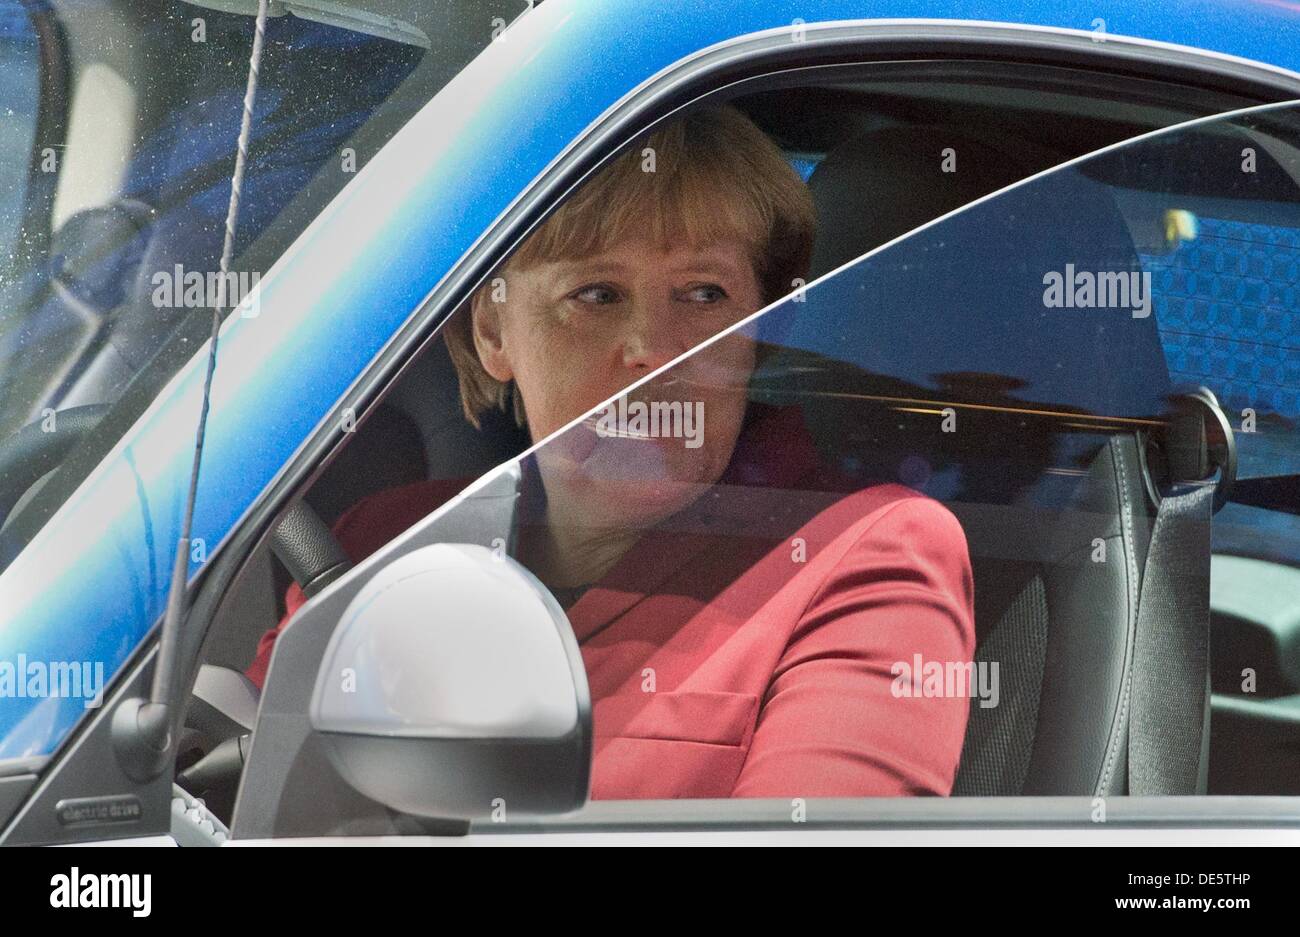 Frankfurt Main, Germany. 12th Sep, 2013. German Chancellor Angela Merkel tests a Smart Electric Drive at the International Motor Show (IAA) in Frankfurt Main, Germany, 12 September 2013. Almost 1100 exhibitors from around the world present novelties at the world's largest automobile show IAA until 22 September 2013. Photo: BORIS ROESSLER/dpa/Alamy Live News Stock Photo